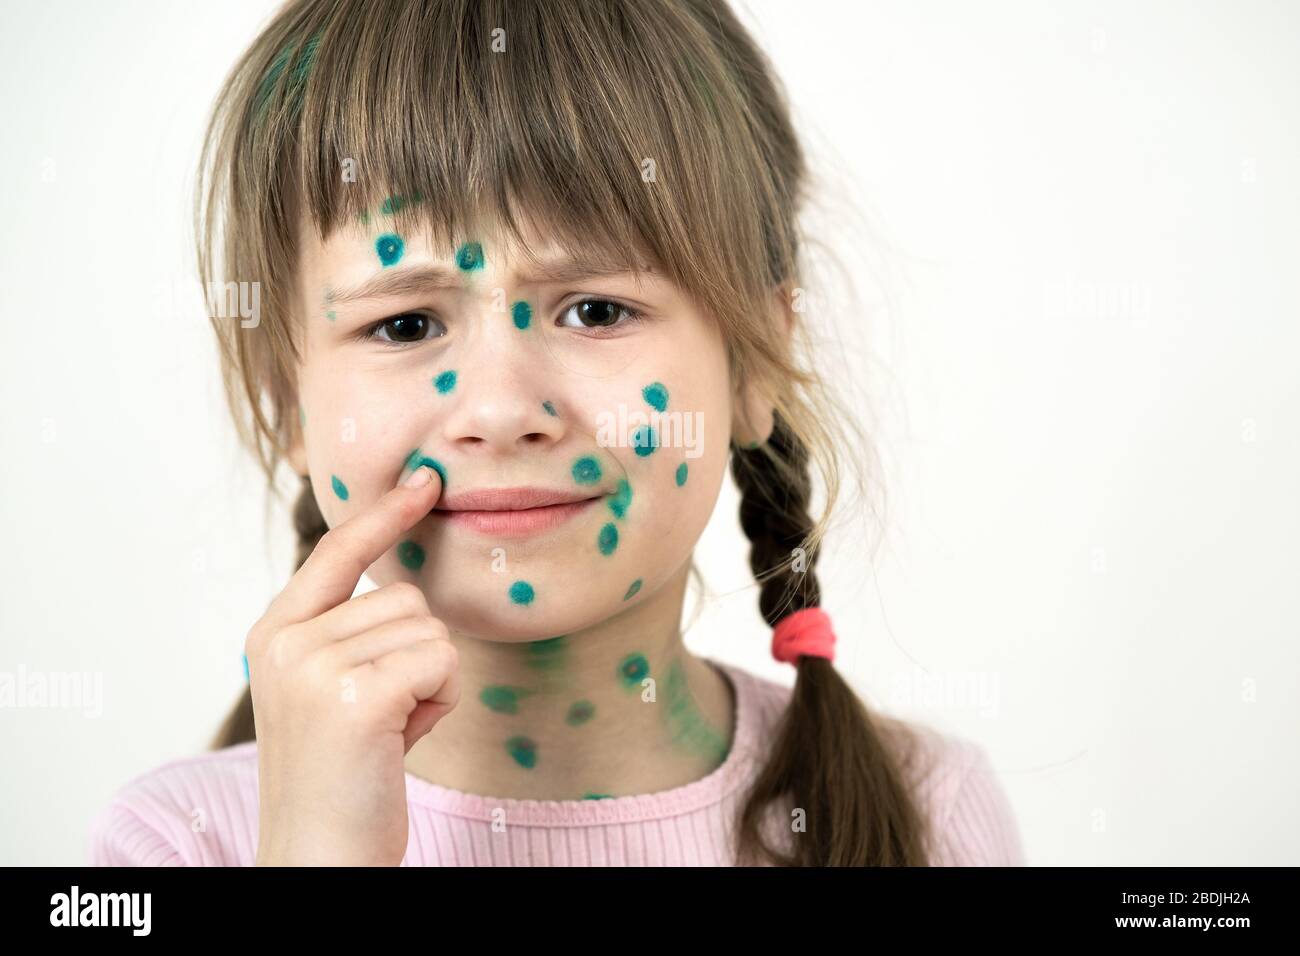 Child girl covered with green rashes on face ill with chickenpox, measles or rubella virus. Stock Photo